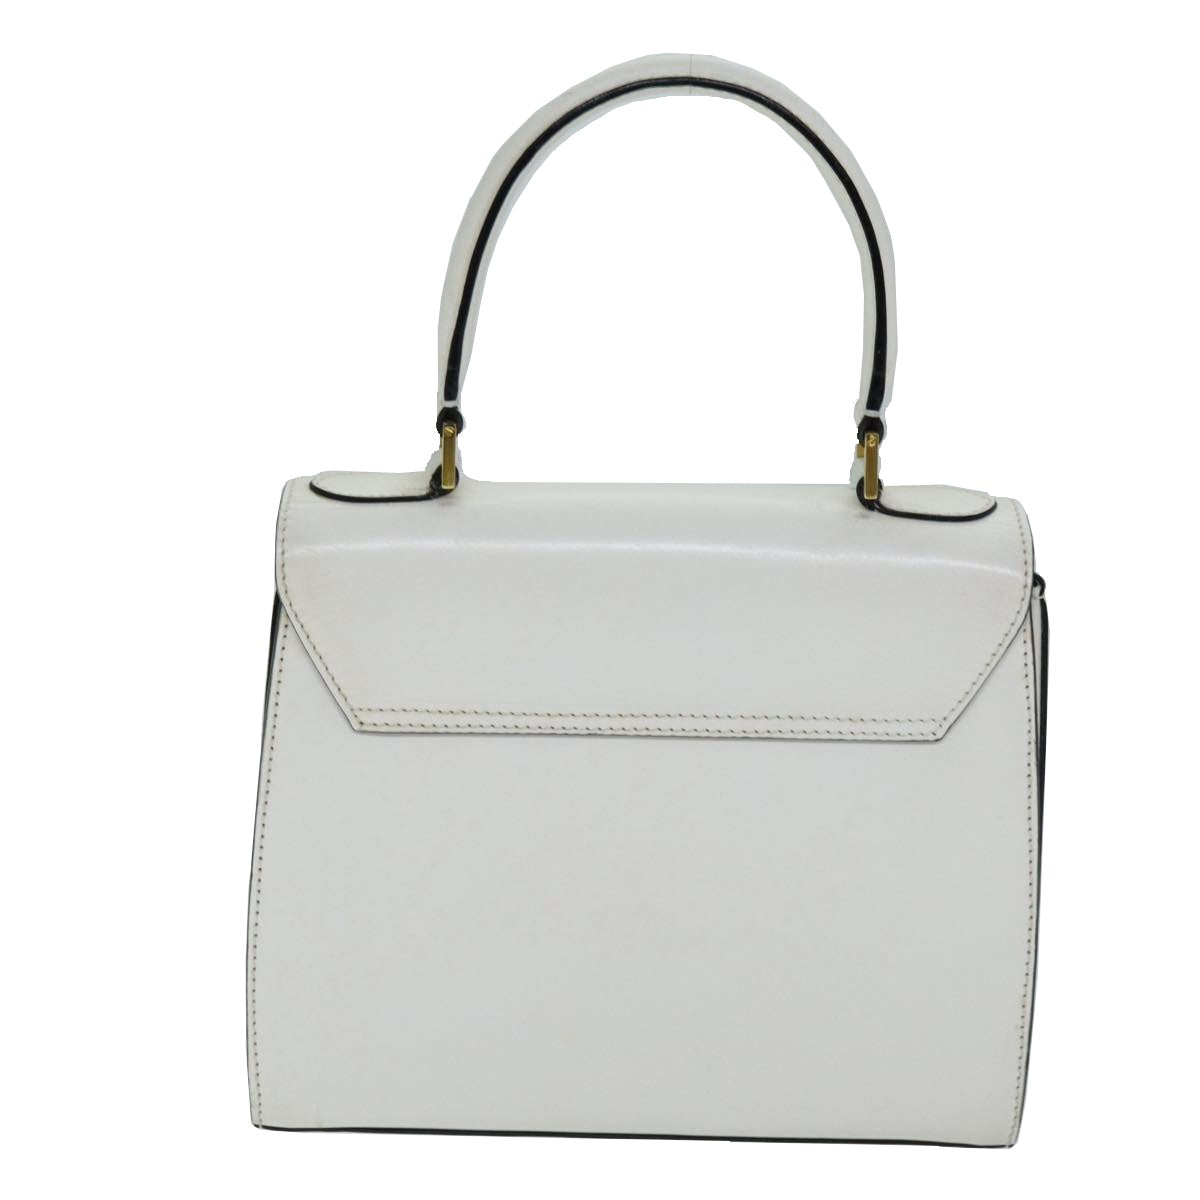 CELINE Hand Bag Leather 2way White Auth 73590 - 0